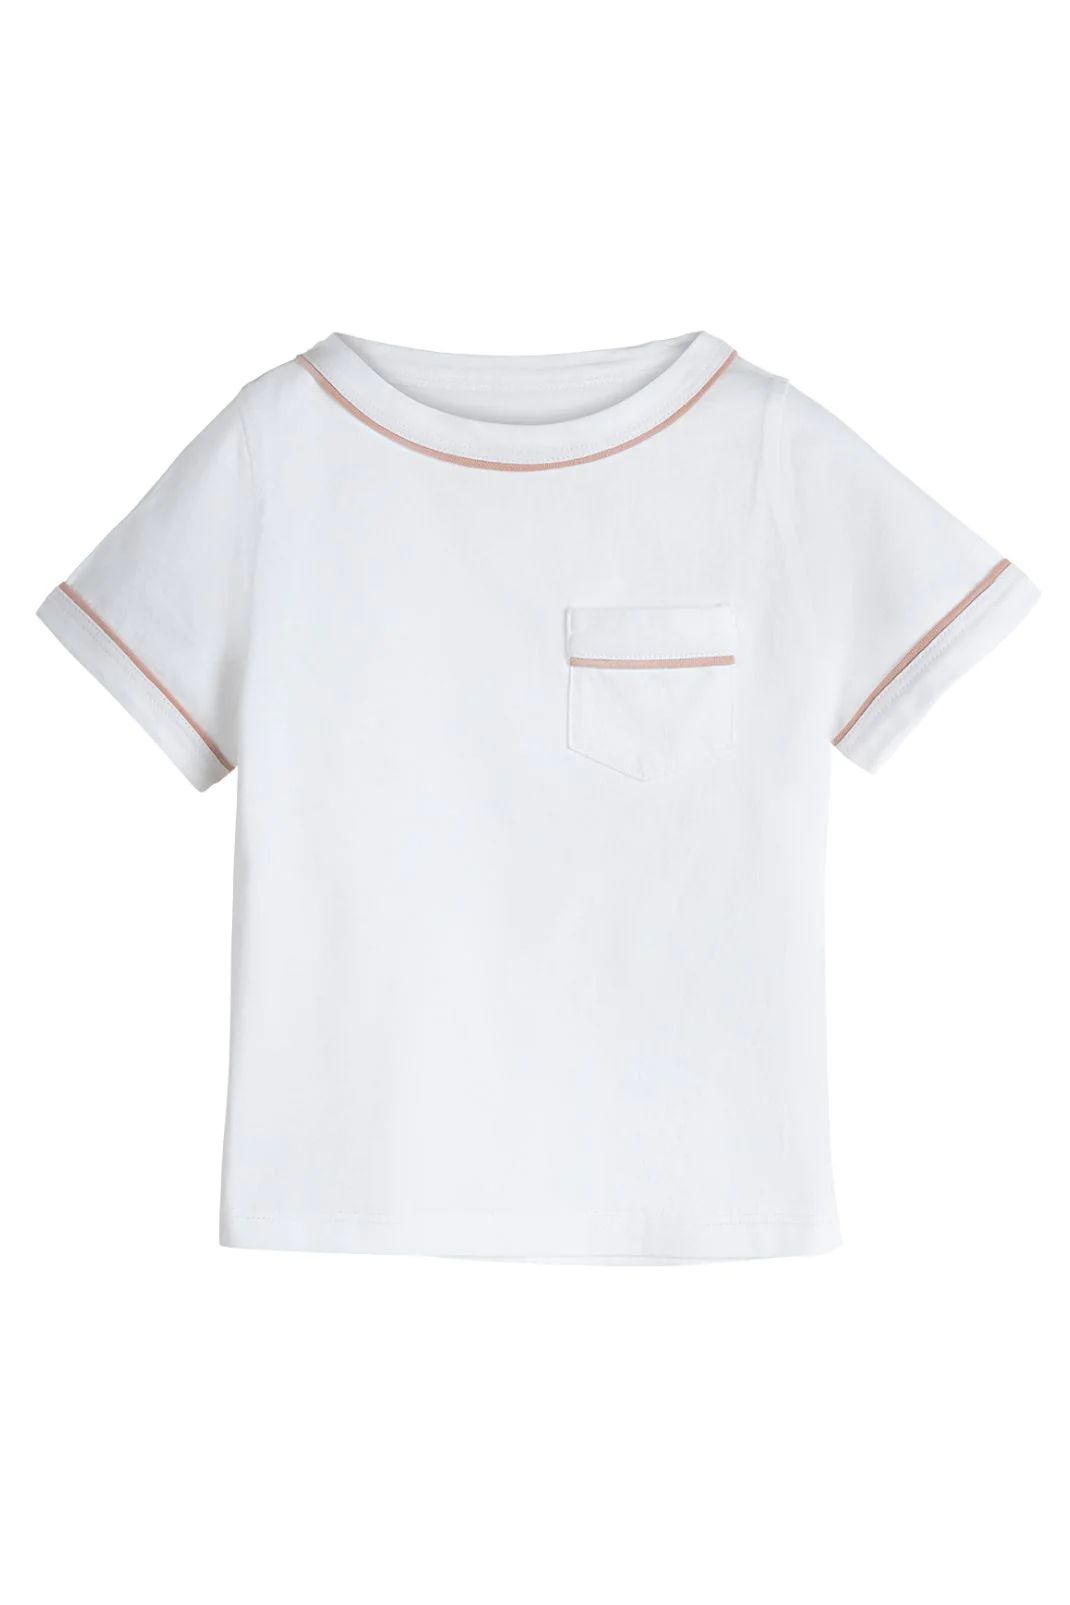 James Tee in White with Pink Trim | Baybala